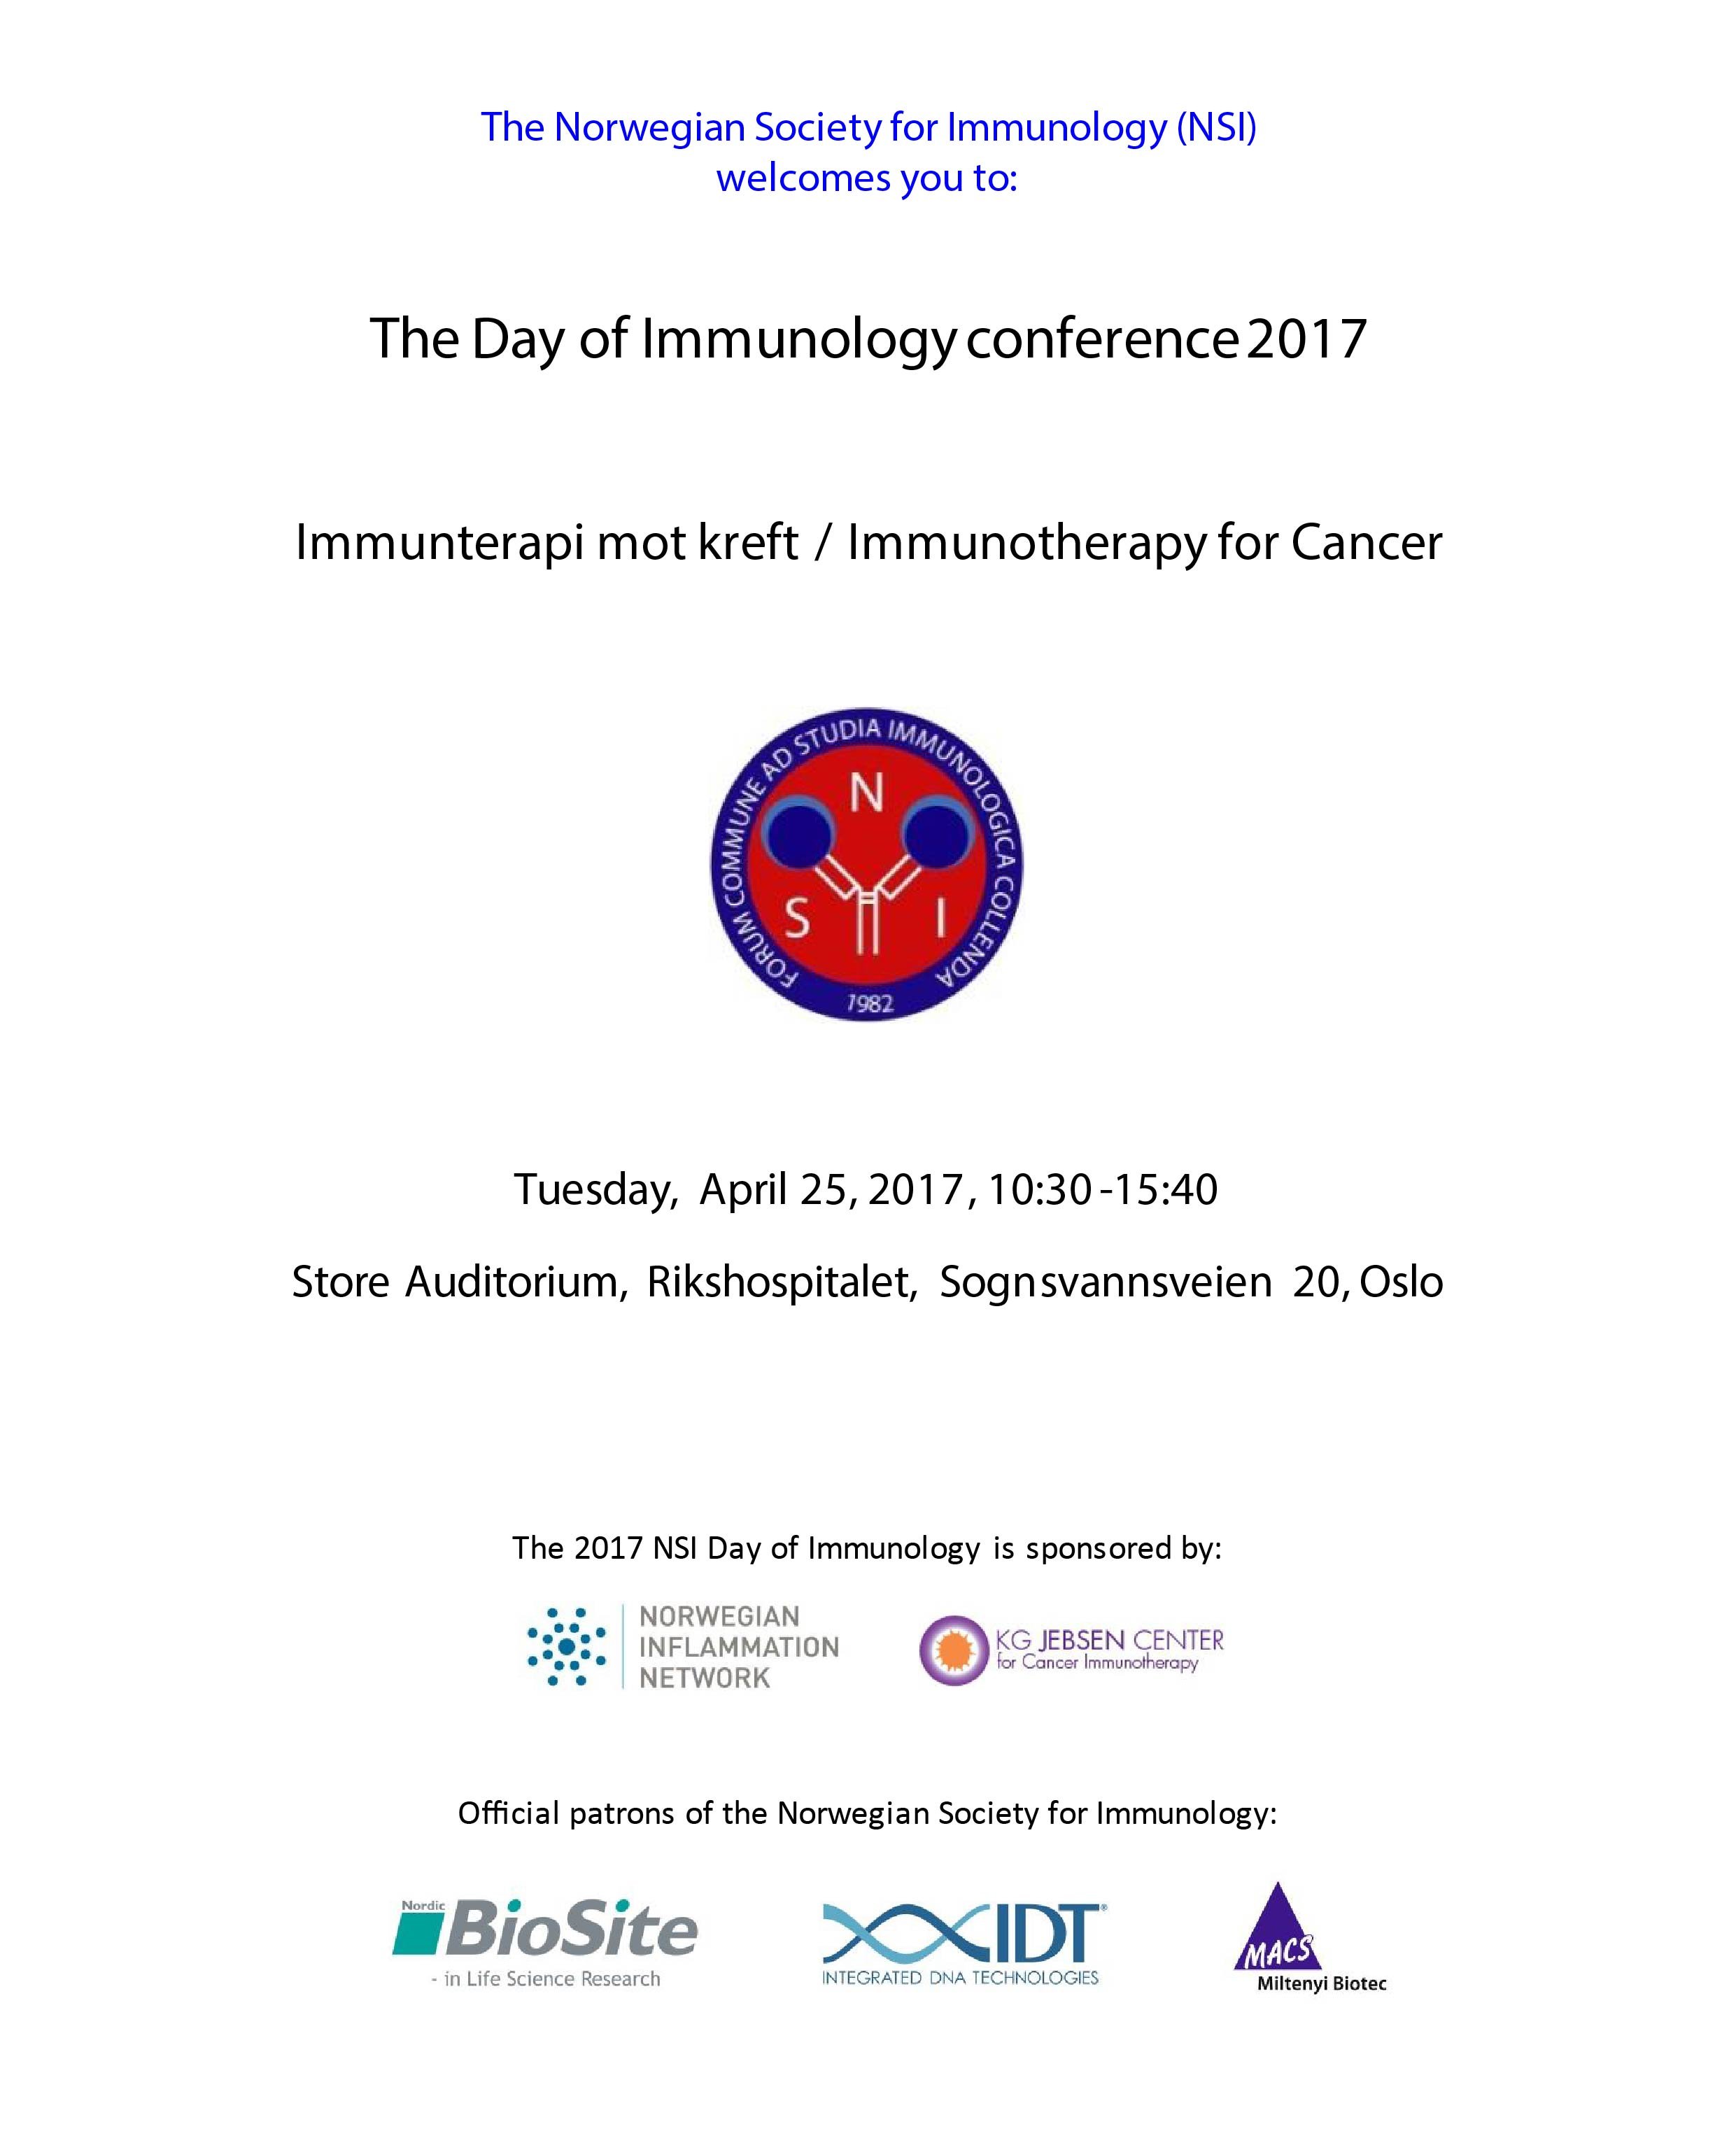 Agenda for The Day of Immunology Conference